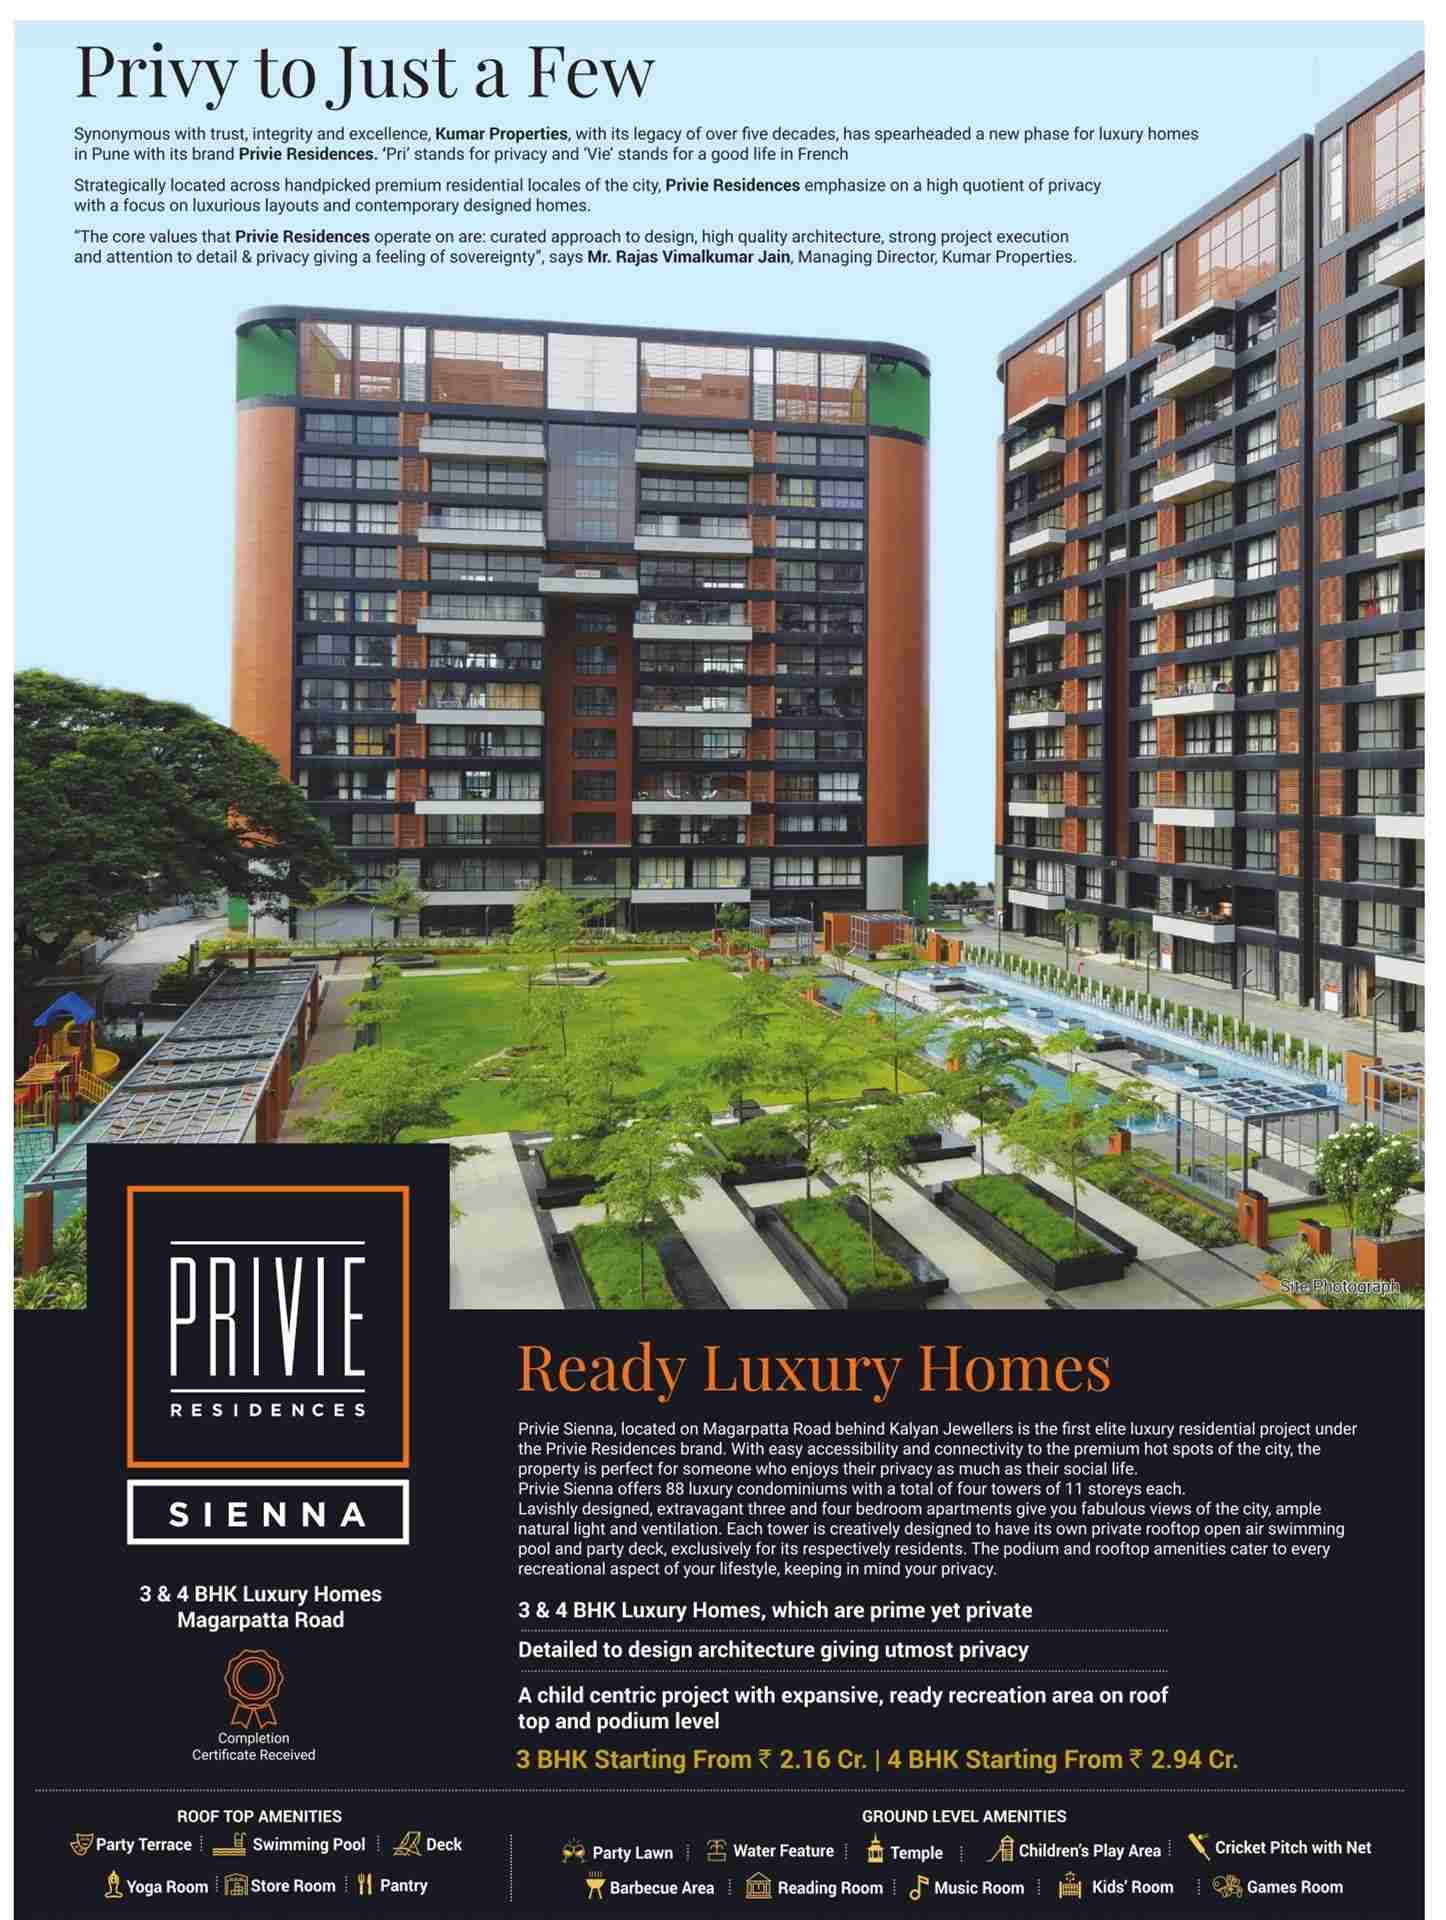 Ready luxury homes with world class amenities at Privie Sienna in Pune Update